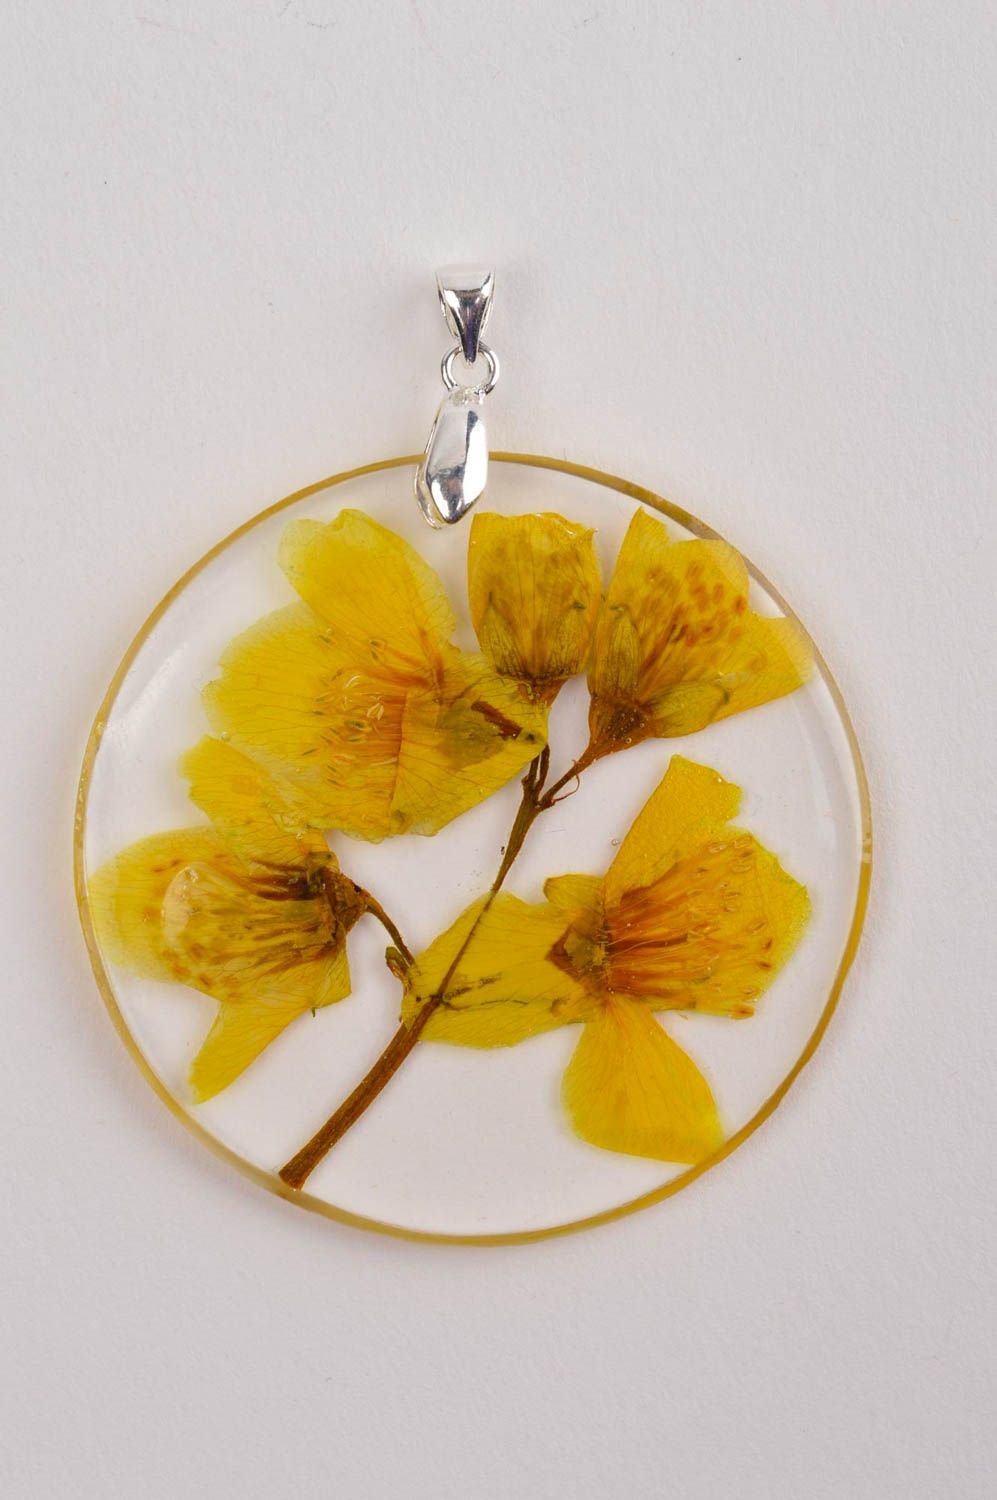 Unusual handmade epoxy pendant botanical jewelry designs gifts for her photo 2